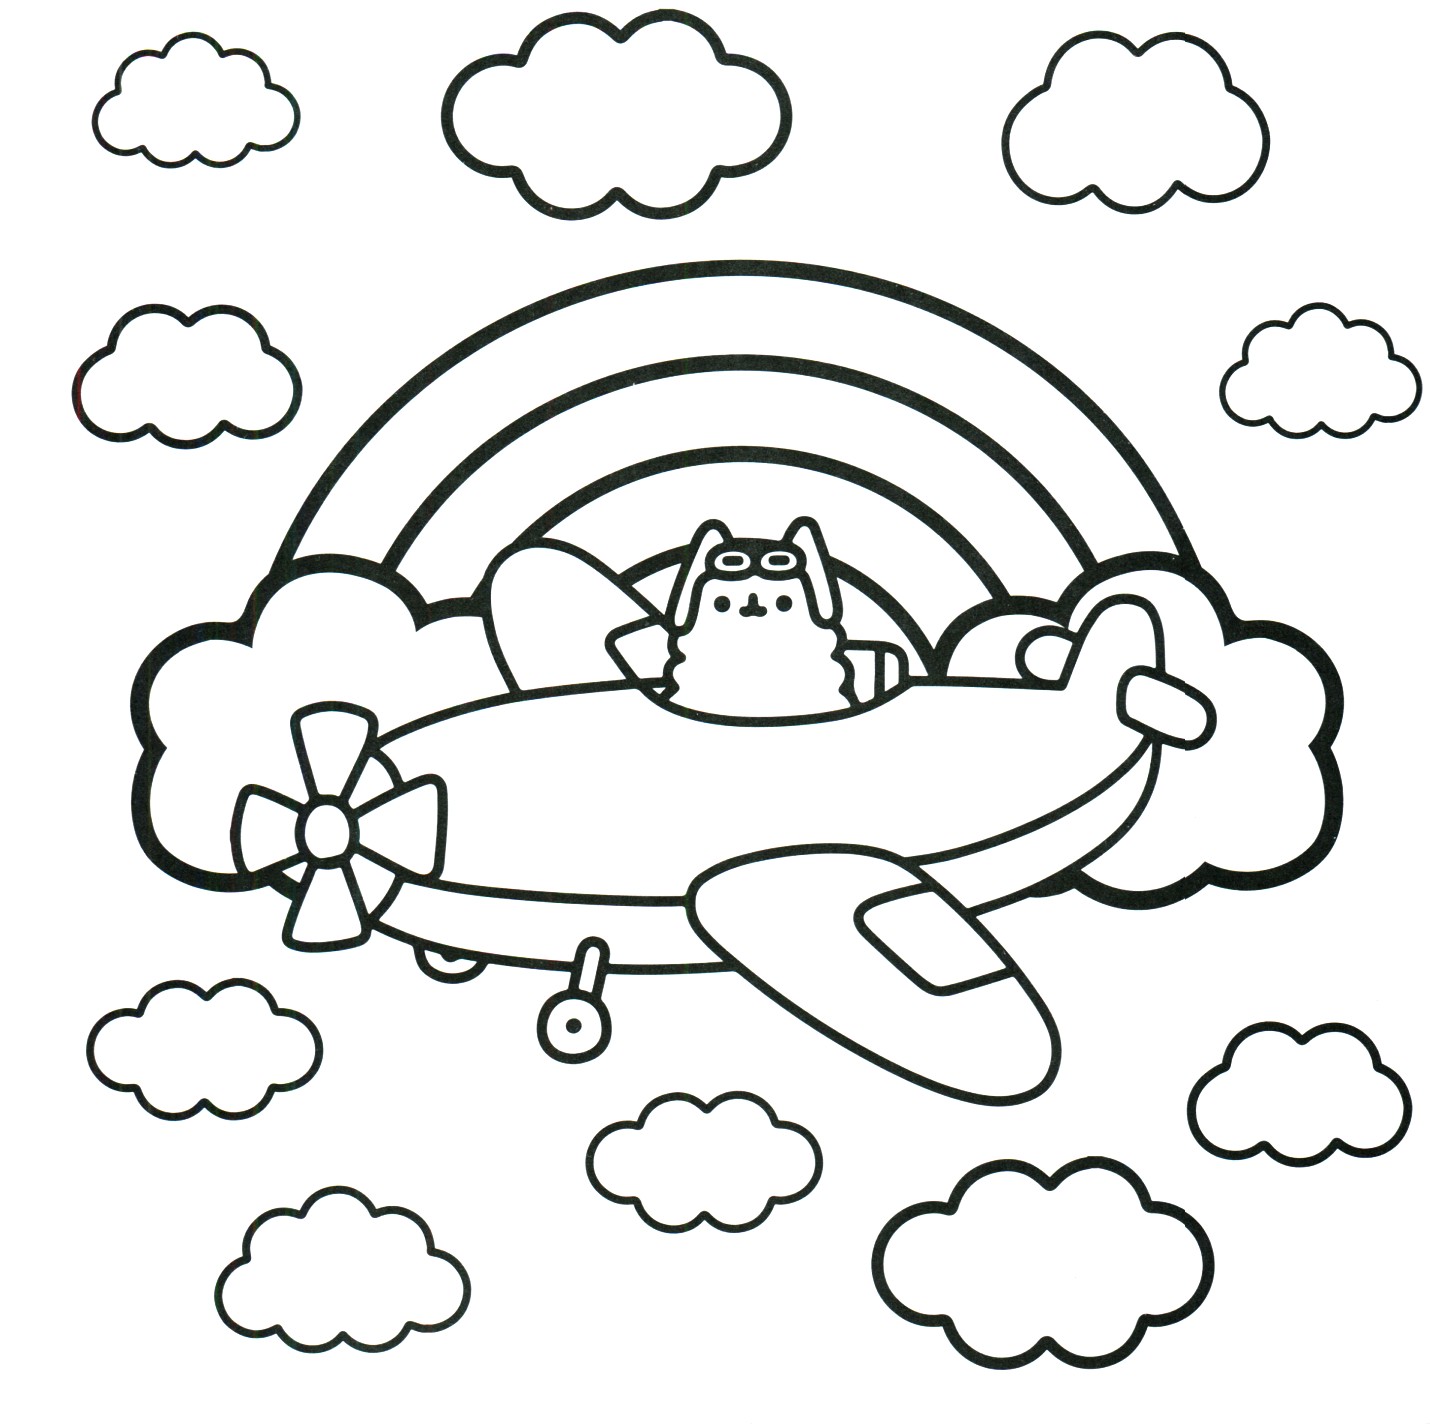 Pusheen Cat Coloring Pages at GetColorings.com | Free printable